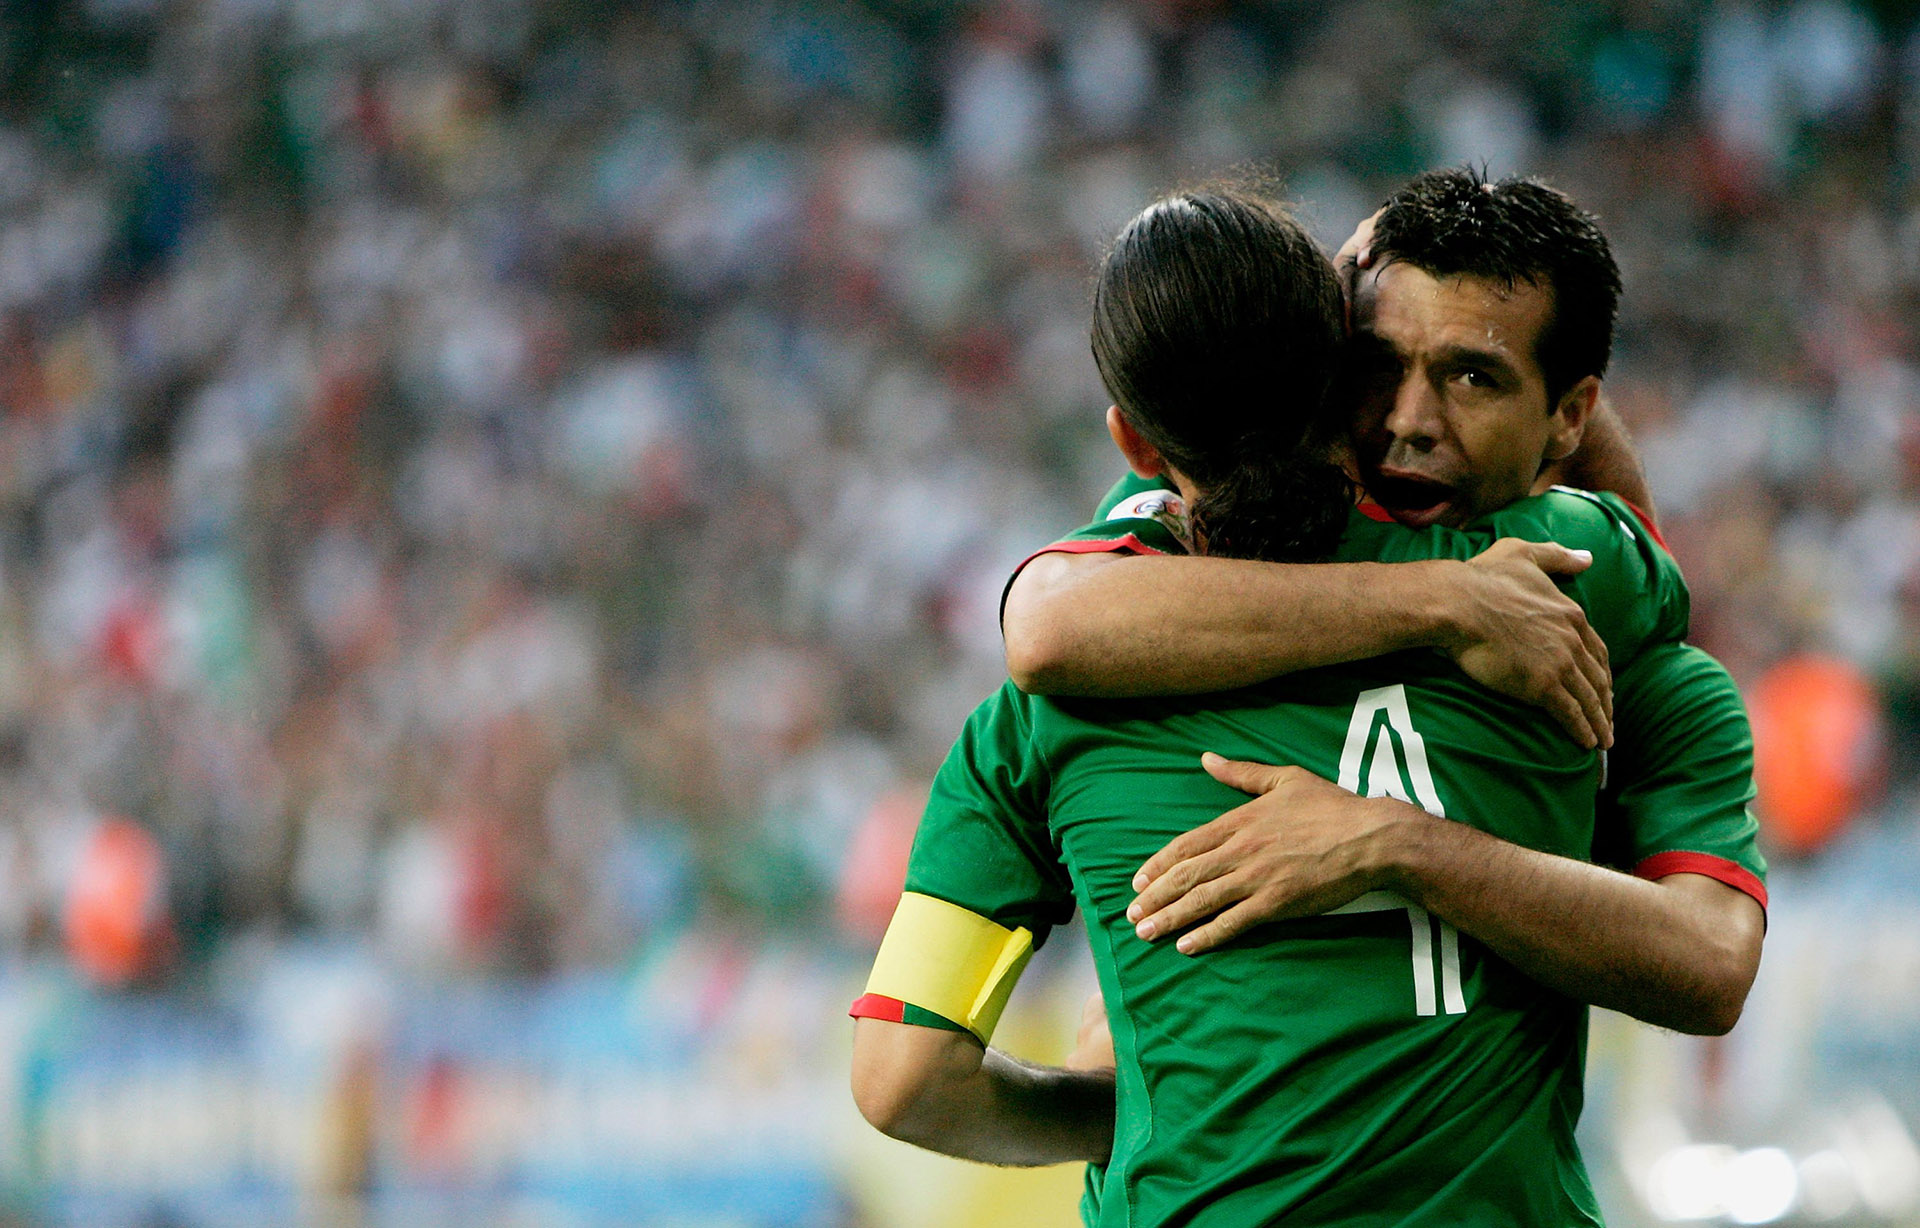 LEIPZIG, GERMANY - JUNE 24: Rafael Marquez (L) of Mexico is congratulated by team mate Jared Borgetti after scoring the opening goal during the FIFA World Cup Germany 2006 Round of 16 match between Argentina and Mexico played at the Zentralstadion on June 24, 2006 in Leipzig, Germany. (Photo by Christof Koepsel/Bongarts/Getty Images)